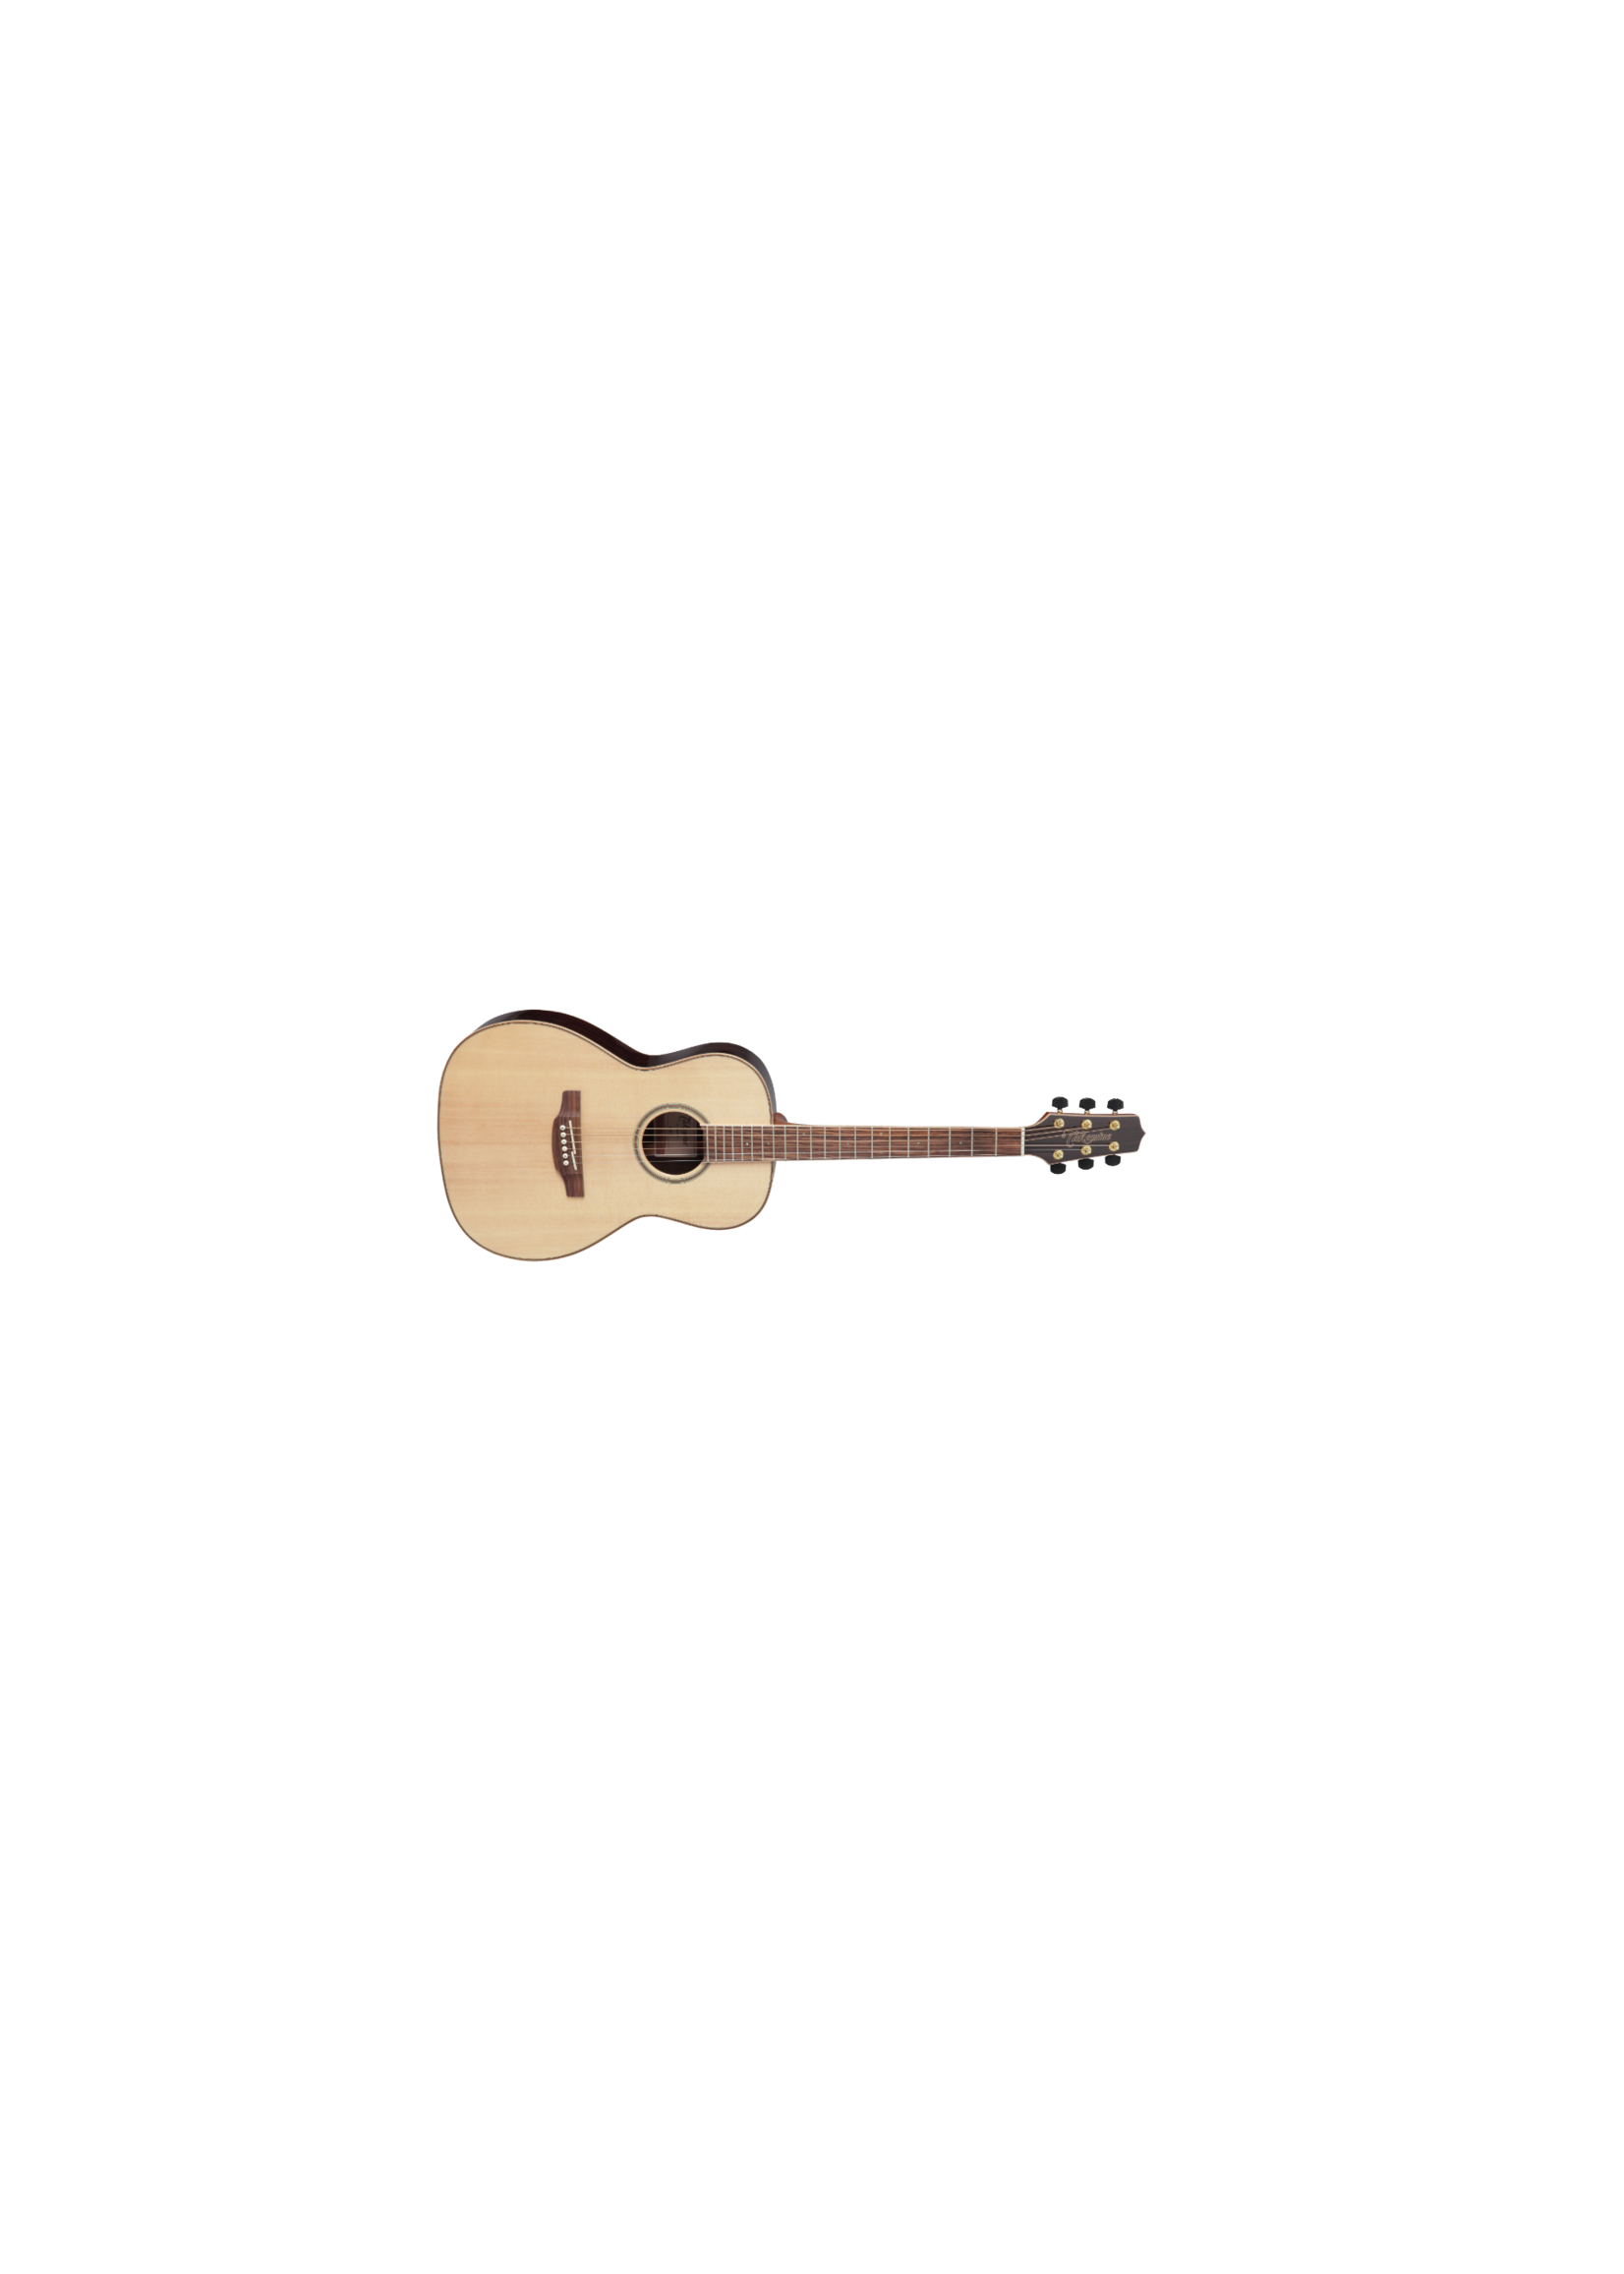 Takamine Takamine GY93NAT GY93 New Yorker Parlor Acoustic Guitar - Natural